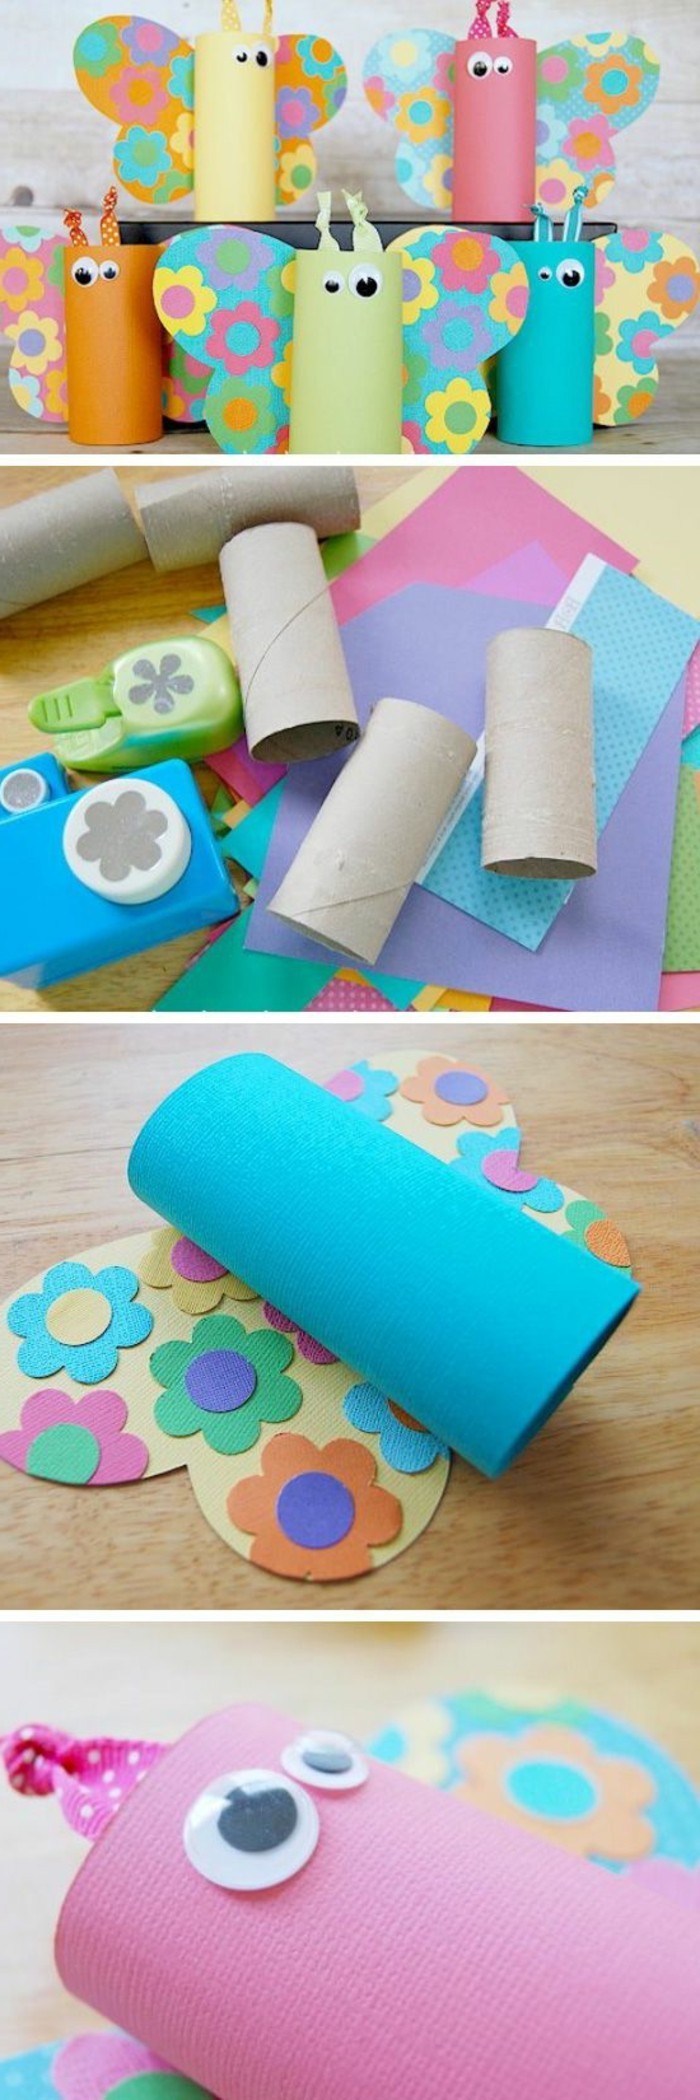 diy projects for kids, five butterflies made from toilet rolls in different colors, with multicolored wings, close up of the items used, the work in progress, and the final result